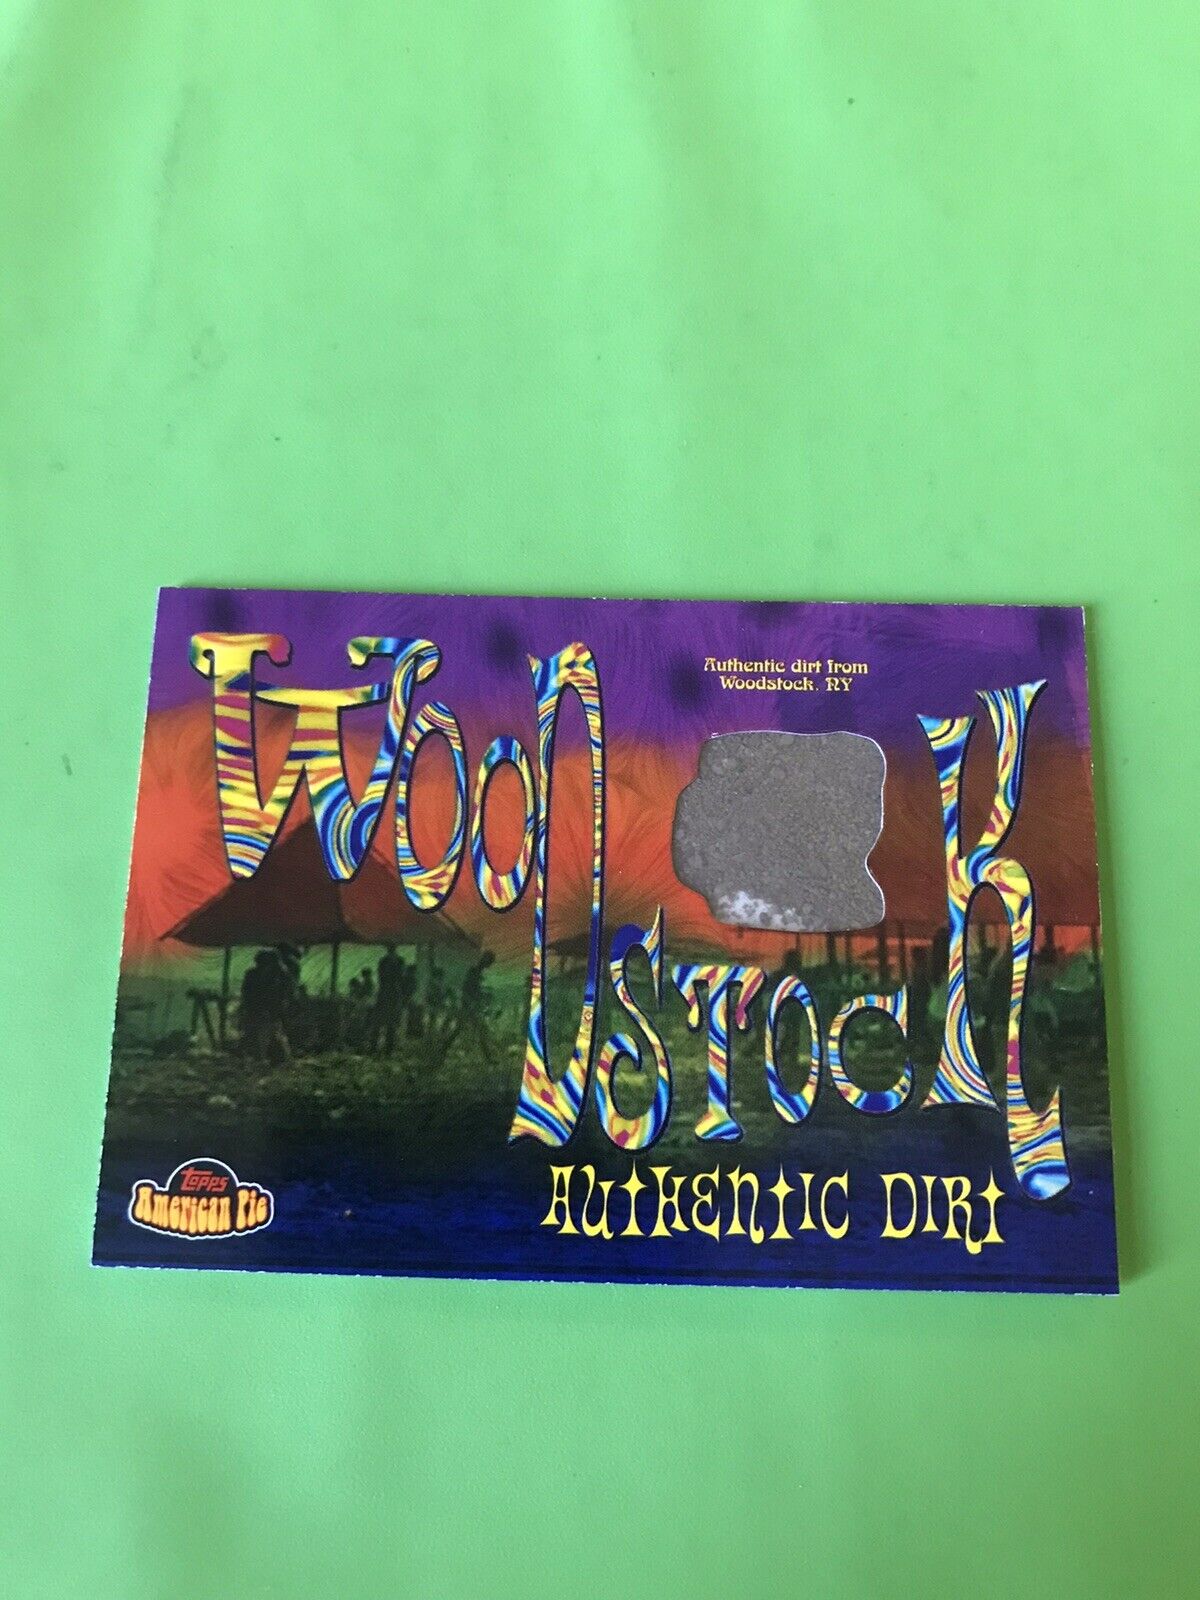 2001 Topps American Pie Woodstock authentic dirt relic card